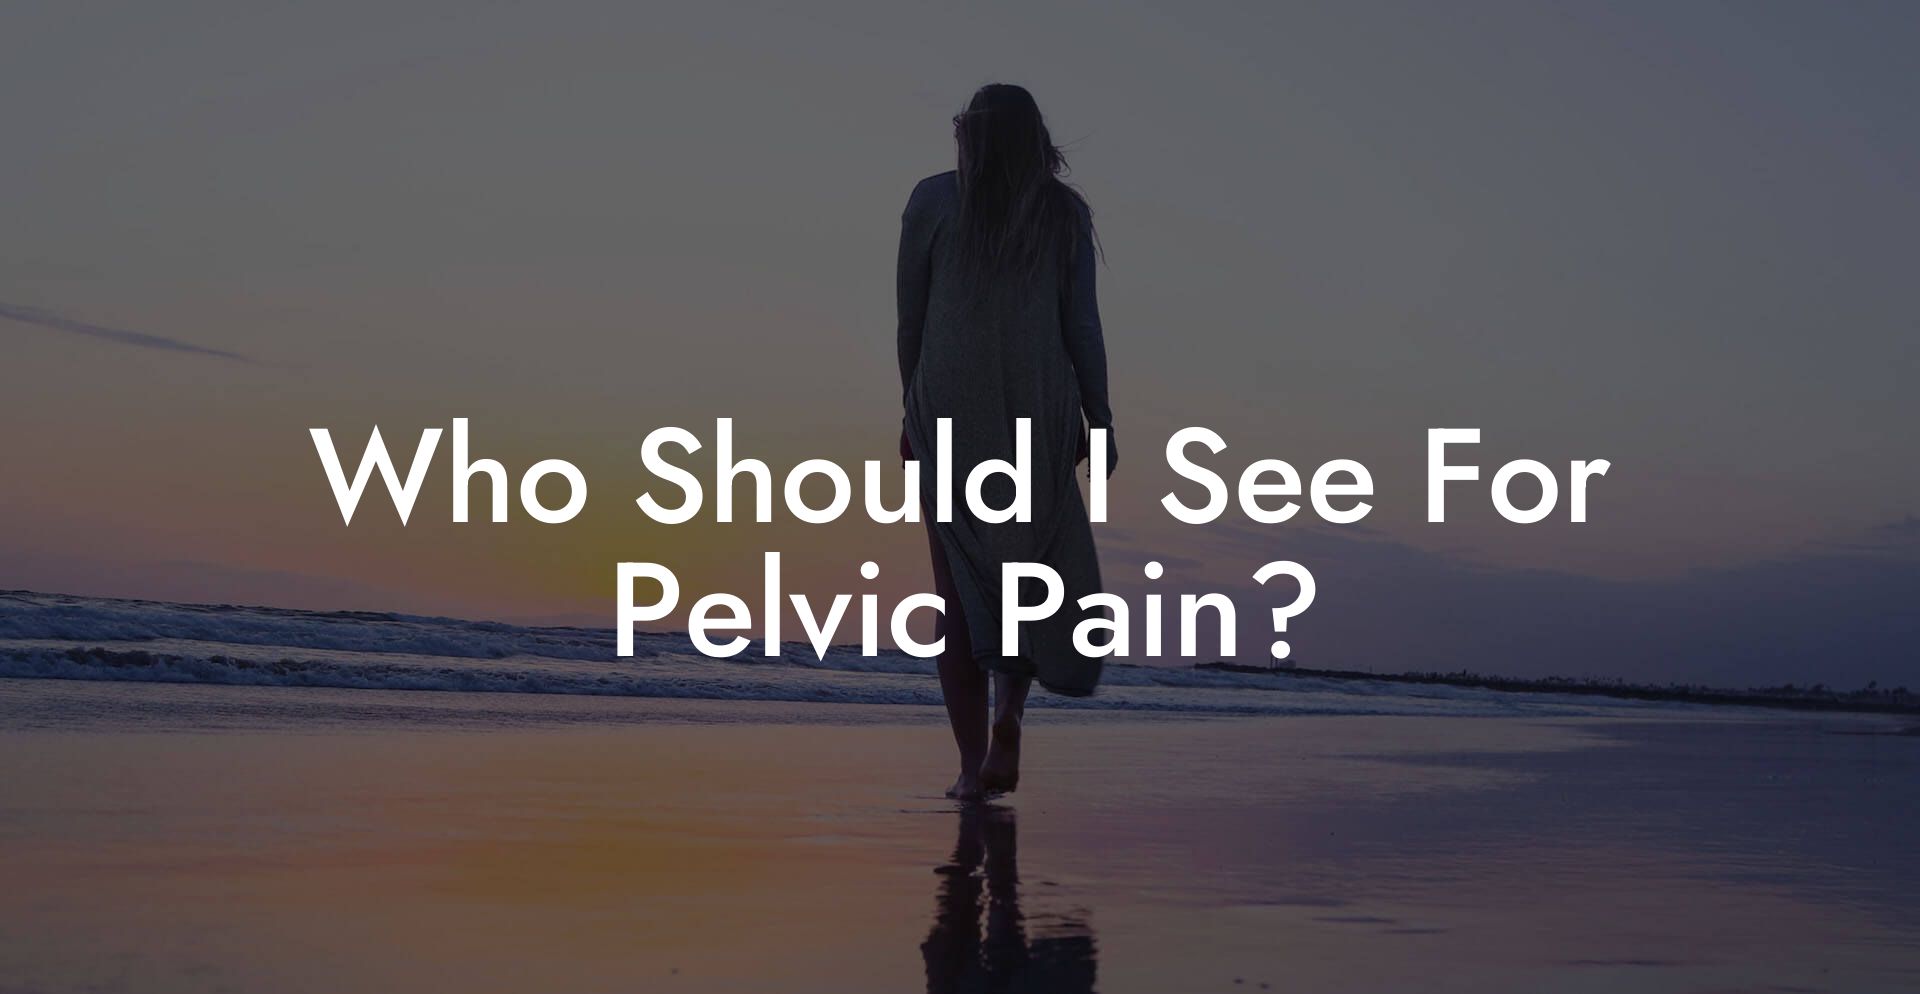 Who Should I See For Pelvic Pain?